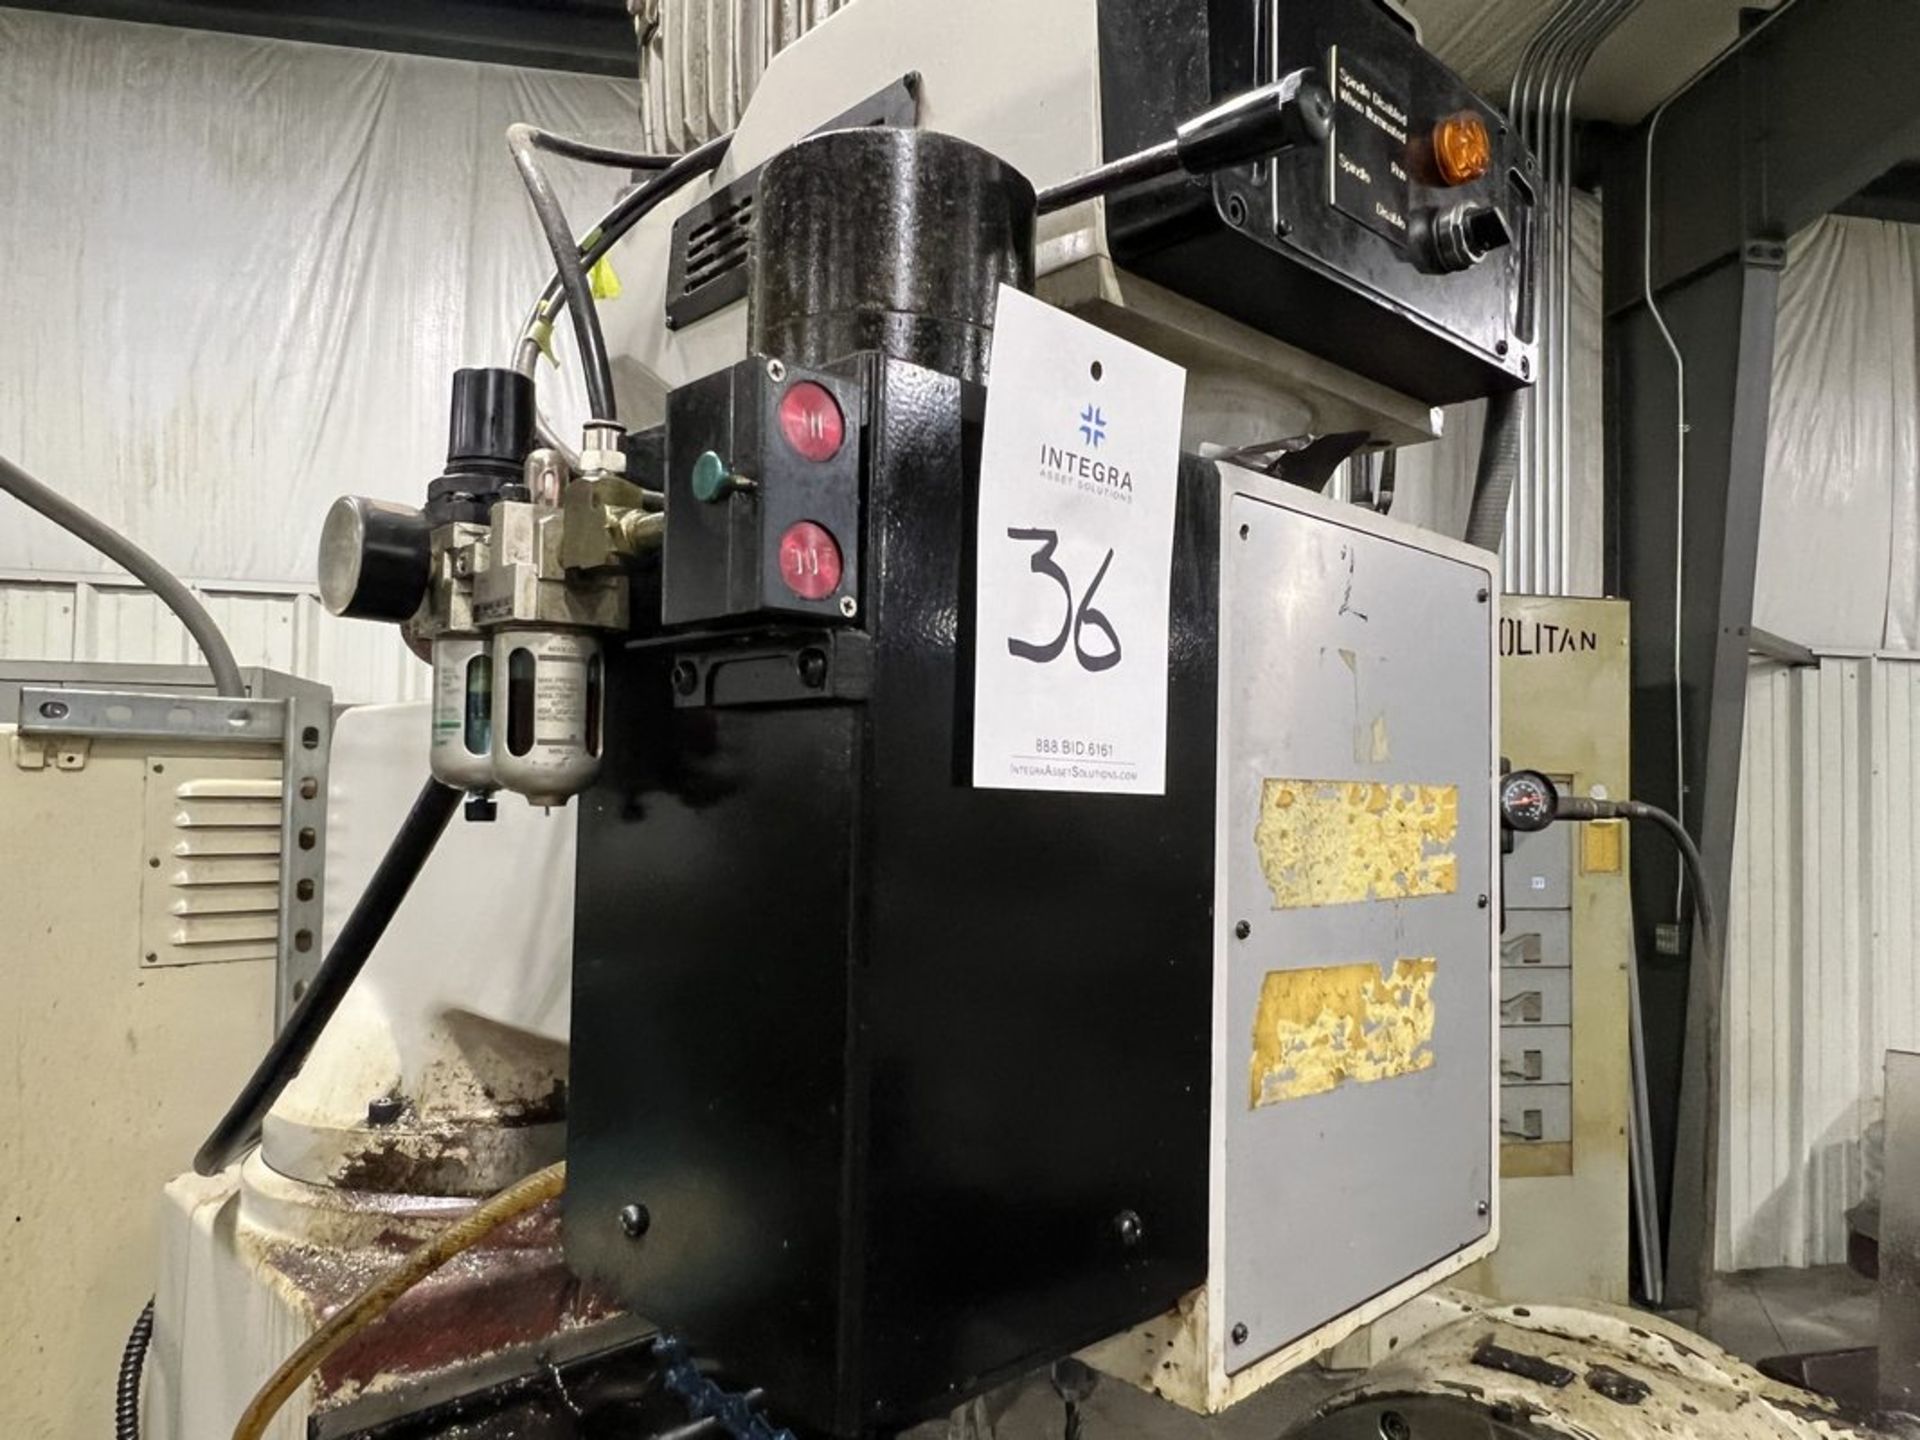 Astro GS18NF CNC Vertical Milling Machine, S/N 877004F - Image 6 of 12